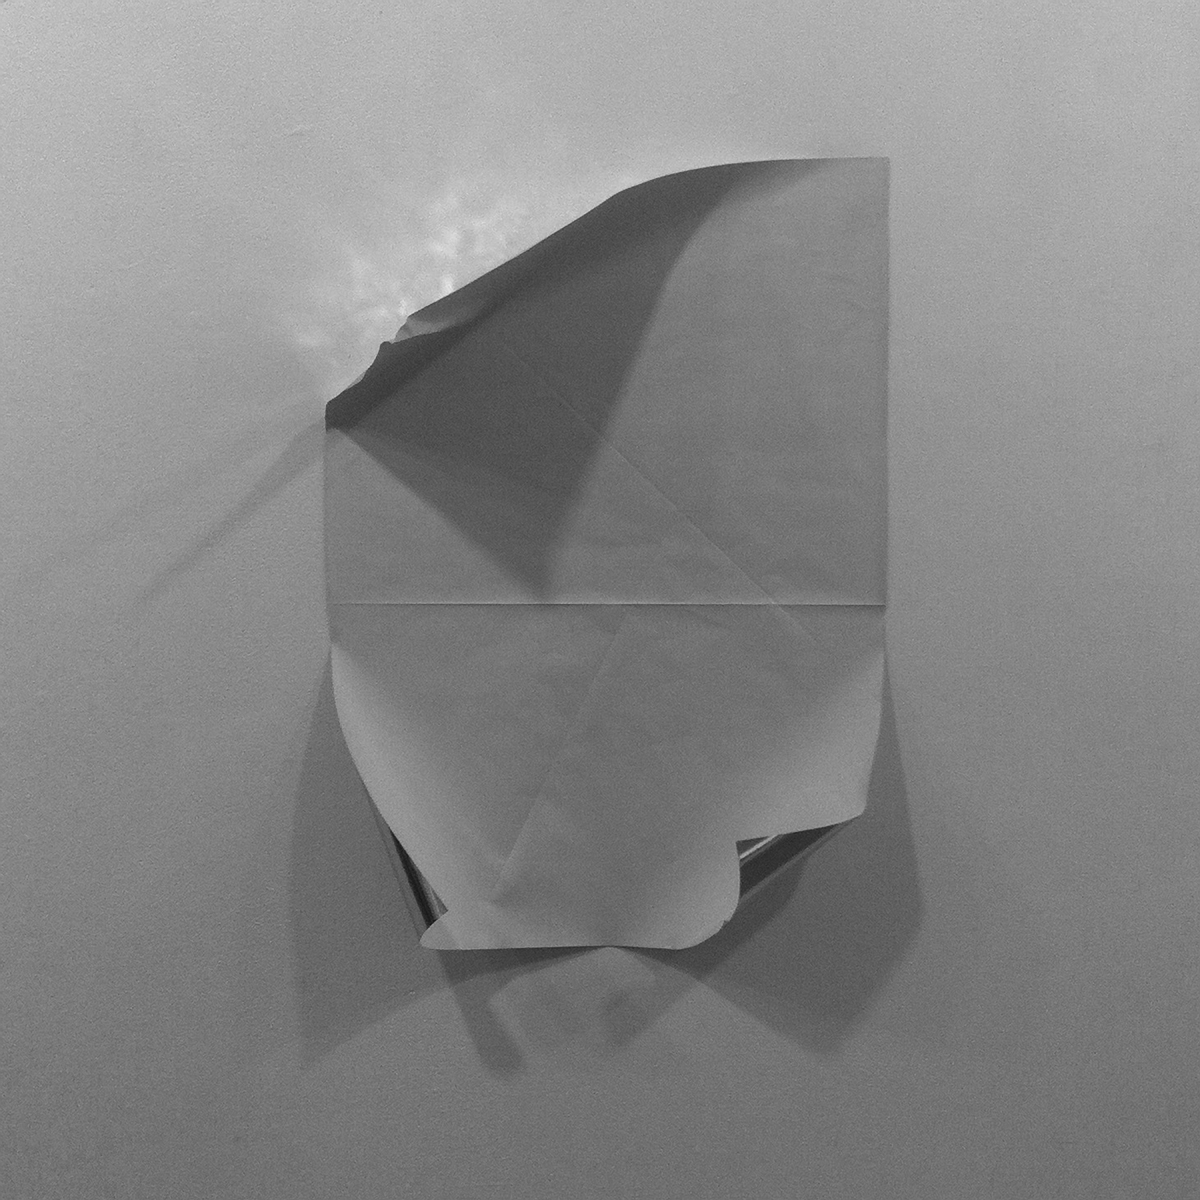  Untitled (from within)  2014, Temporary site specific installation, reflective paper folded and adhered to a wall with an external spotlight. 30 x 30 inches  